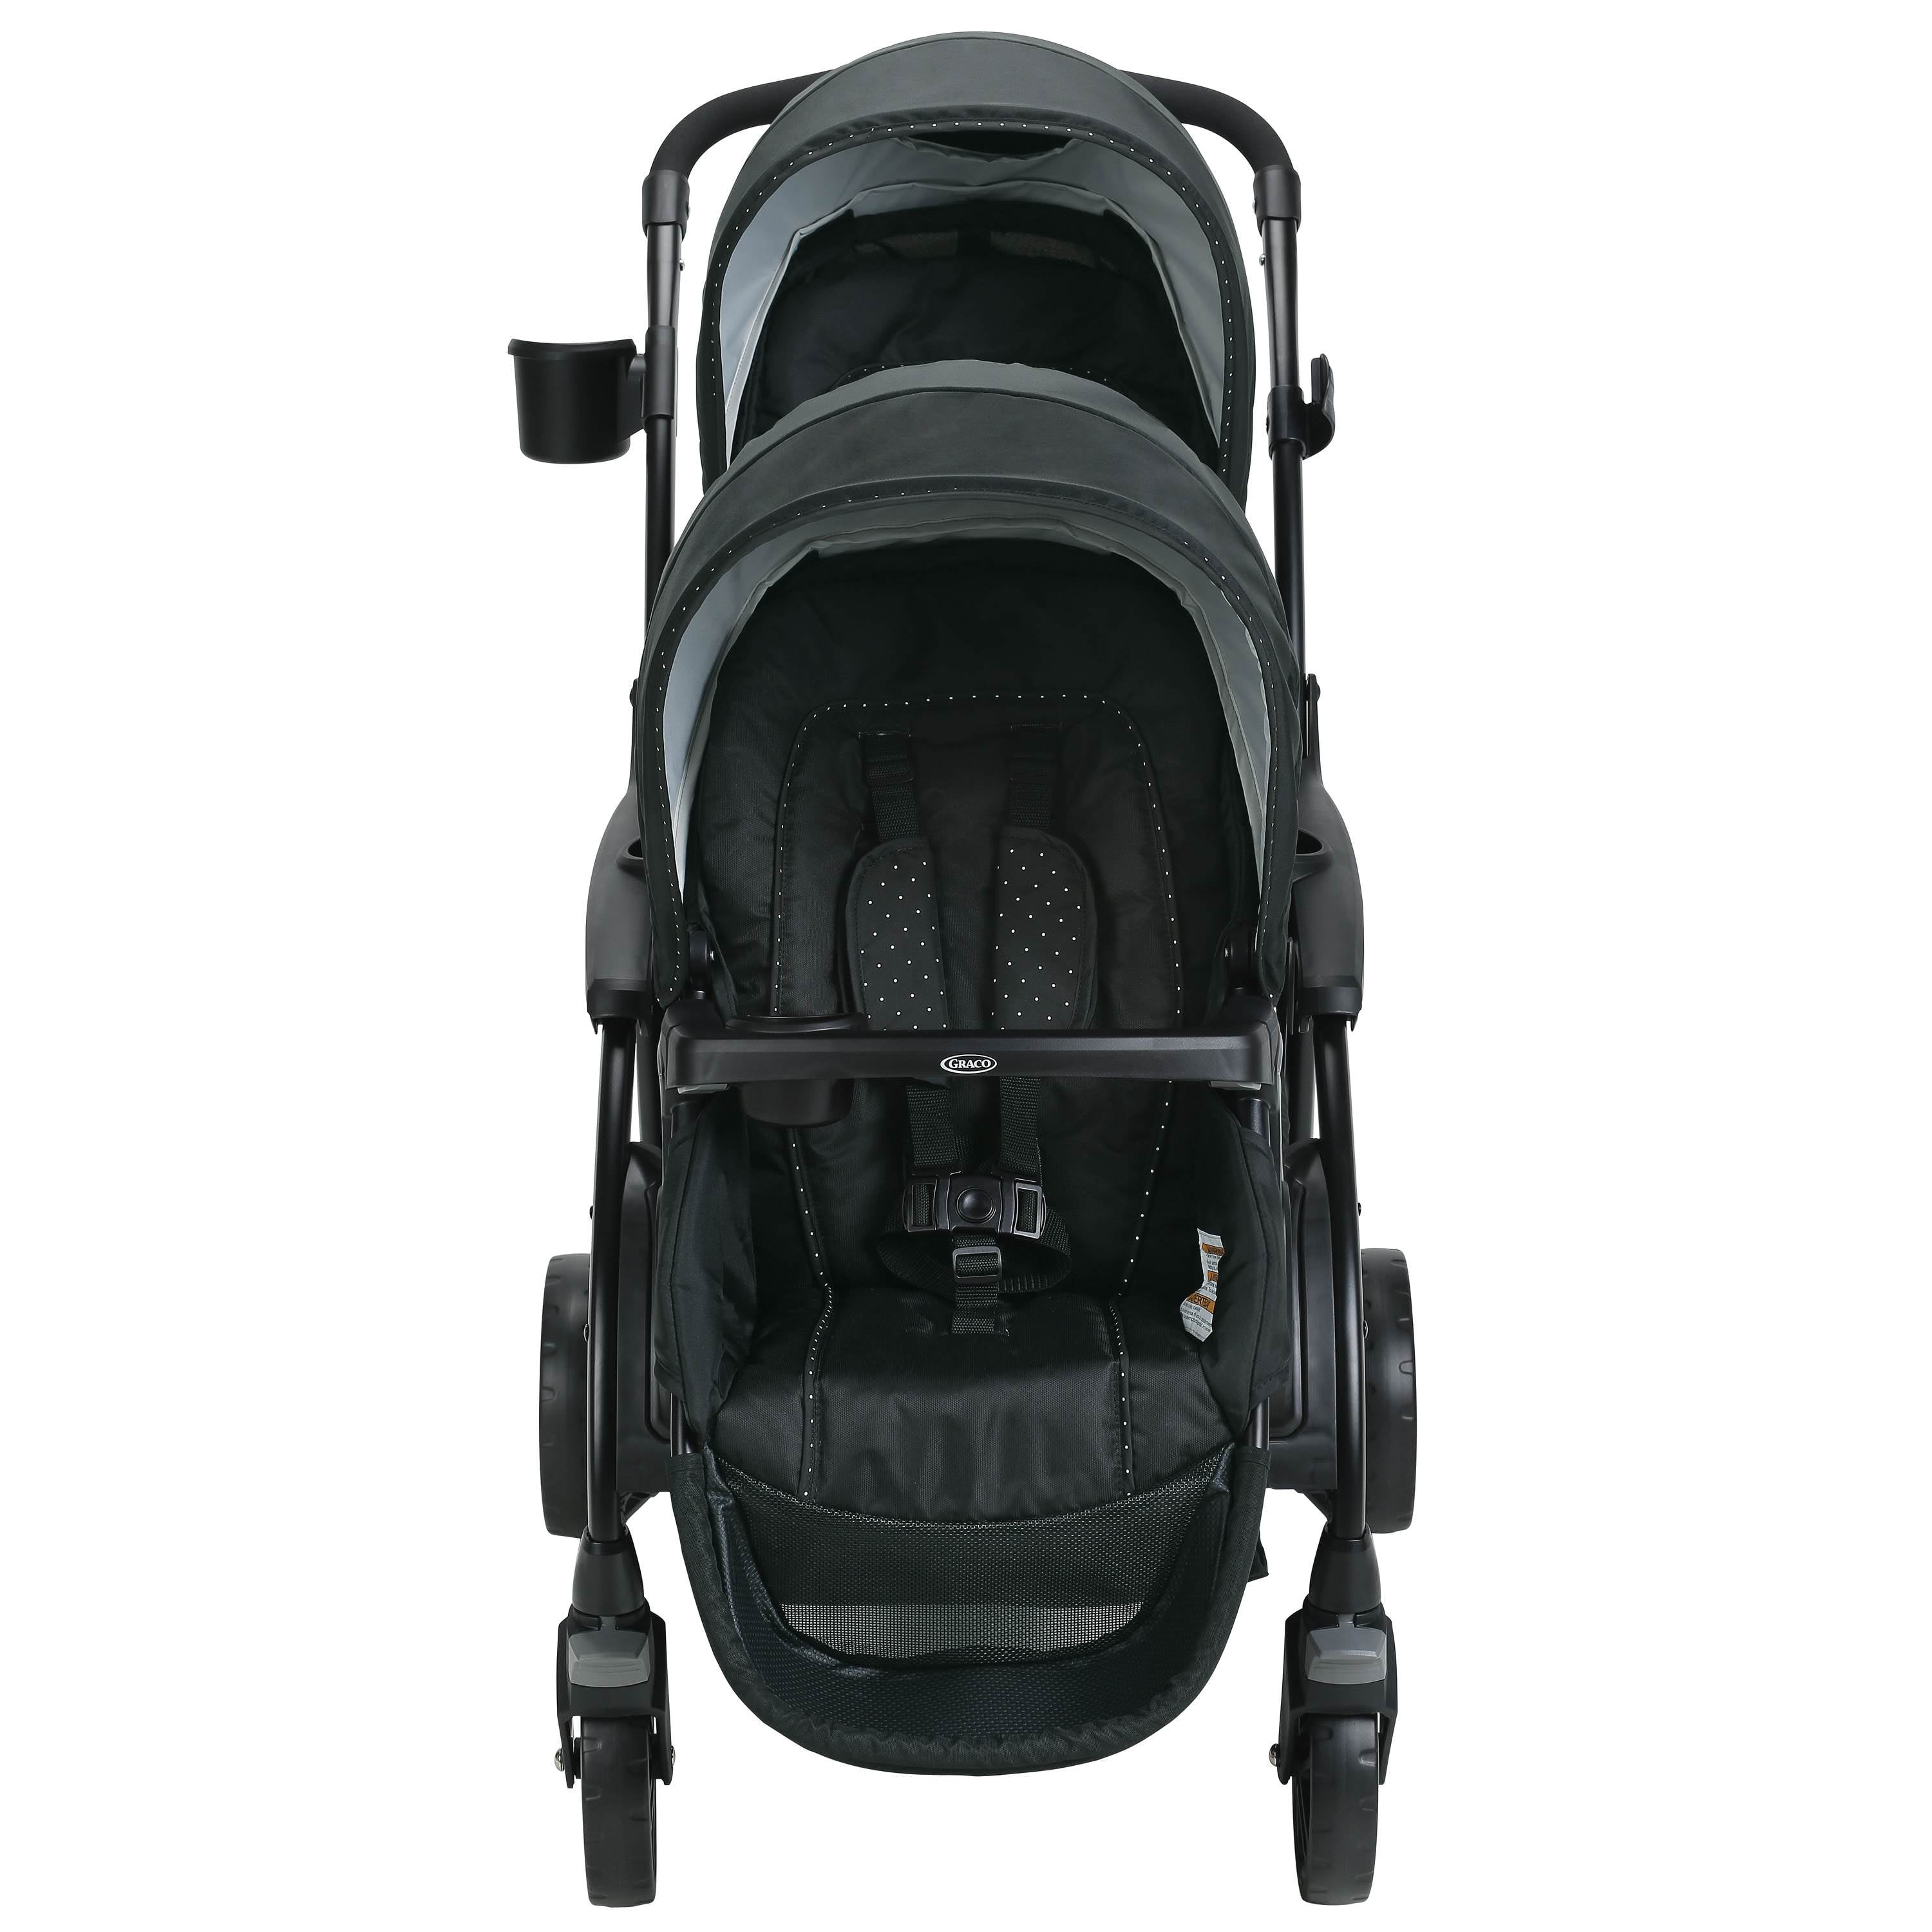 graco modes duo car seat